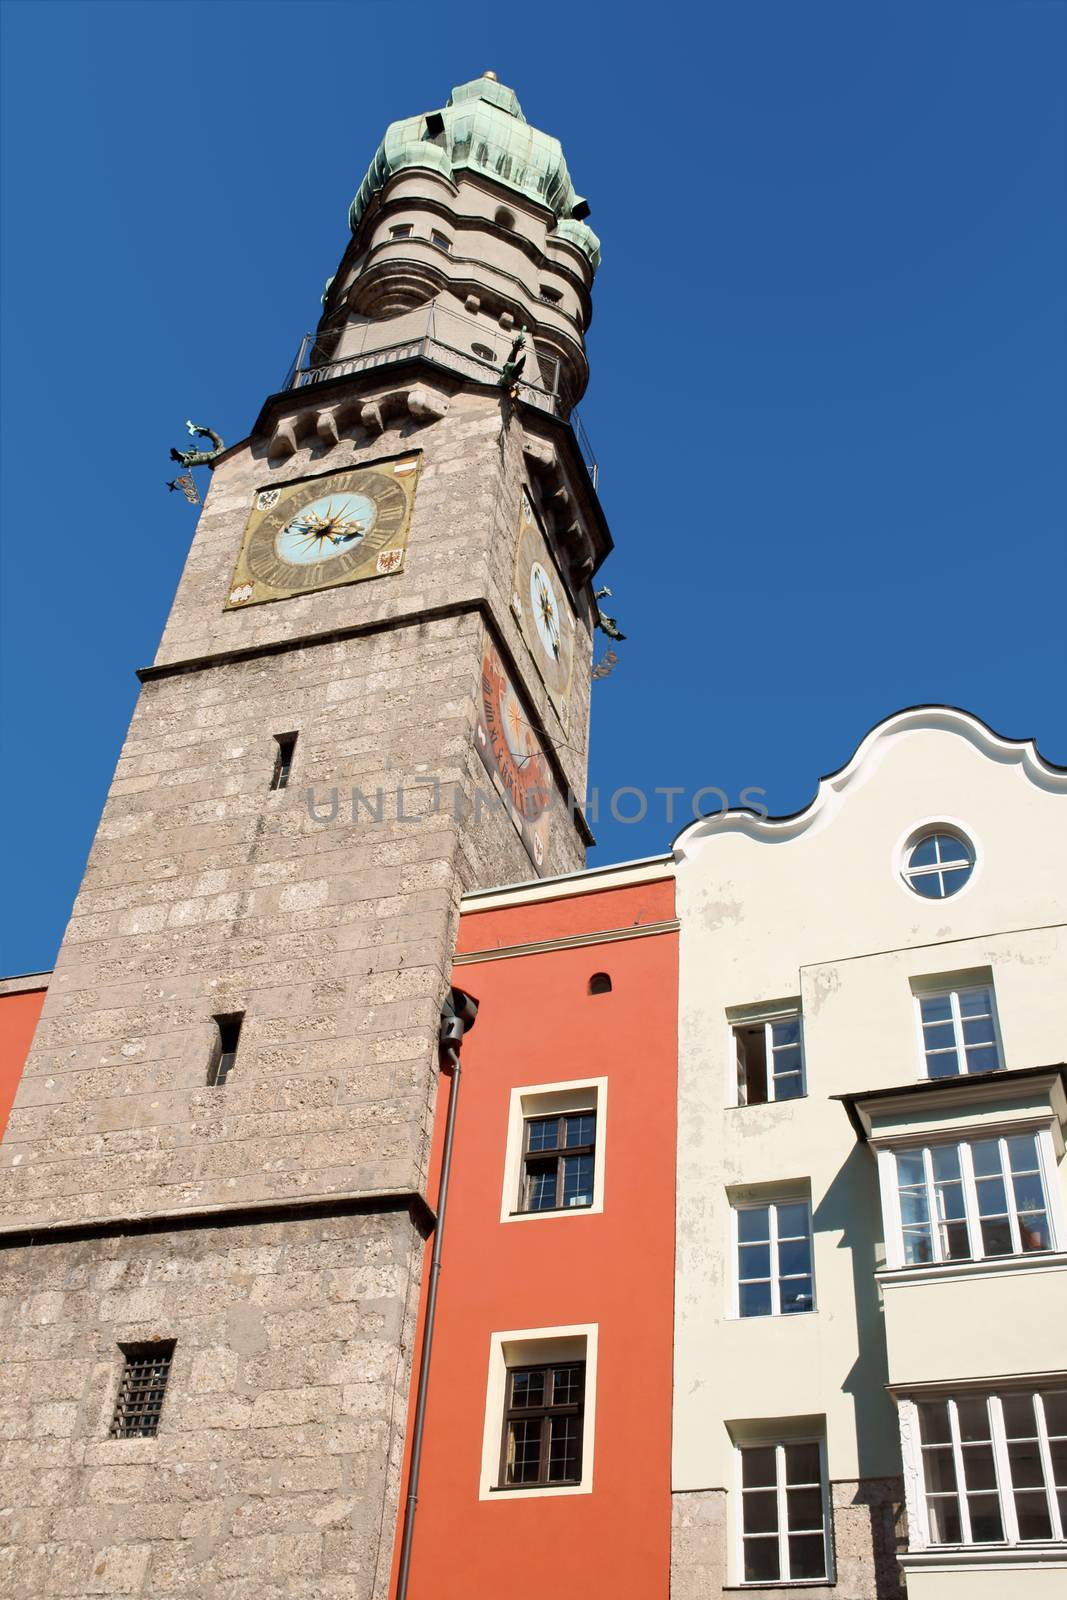 View of the old town of Innsbruck (Altstadt) and and it's watch tower with clock and copper roof, among colorful houses.